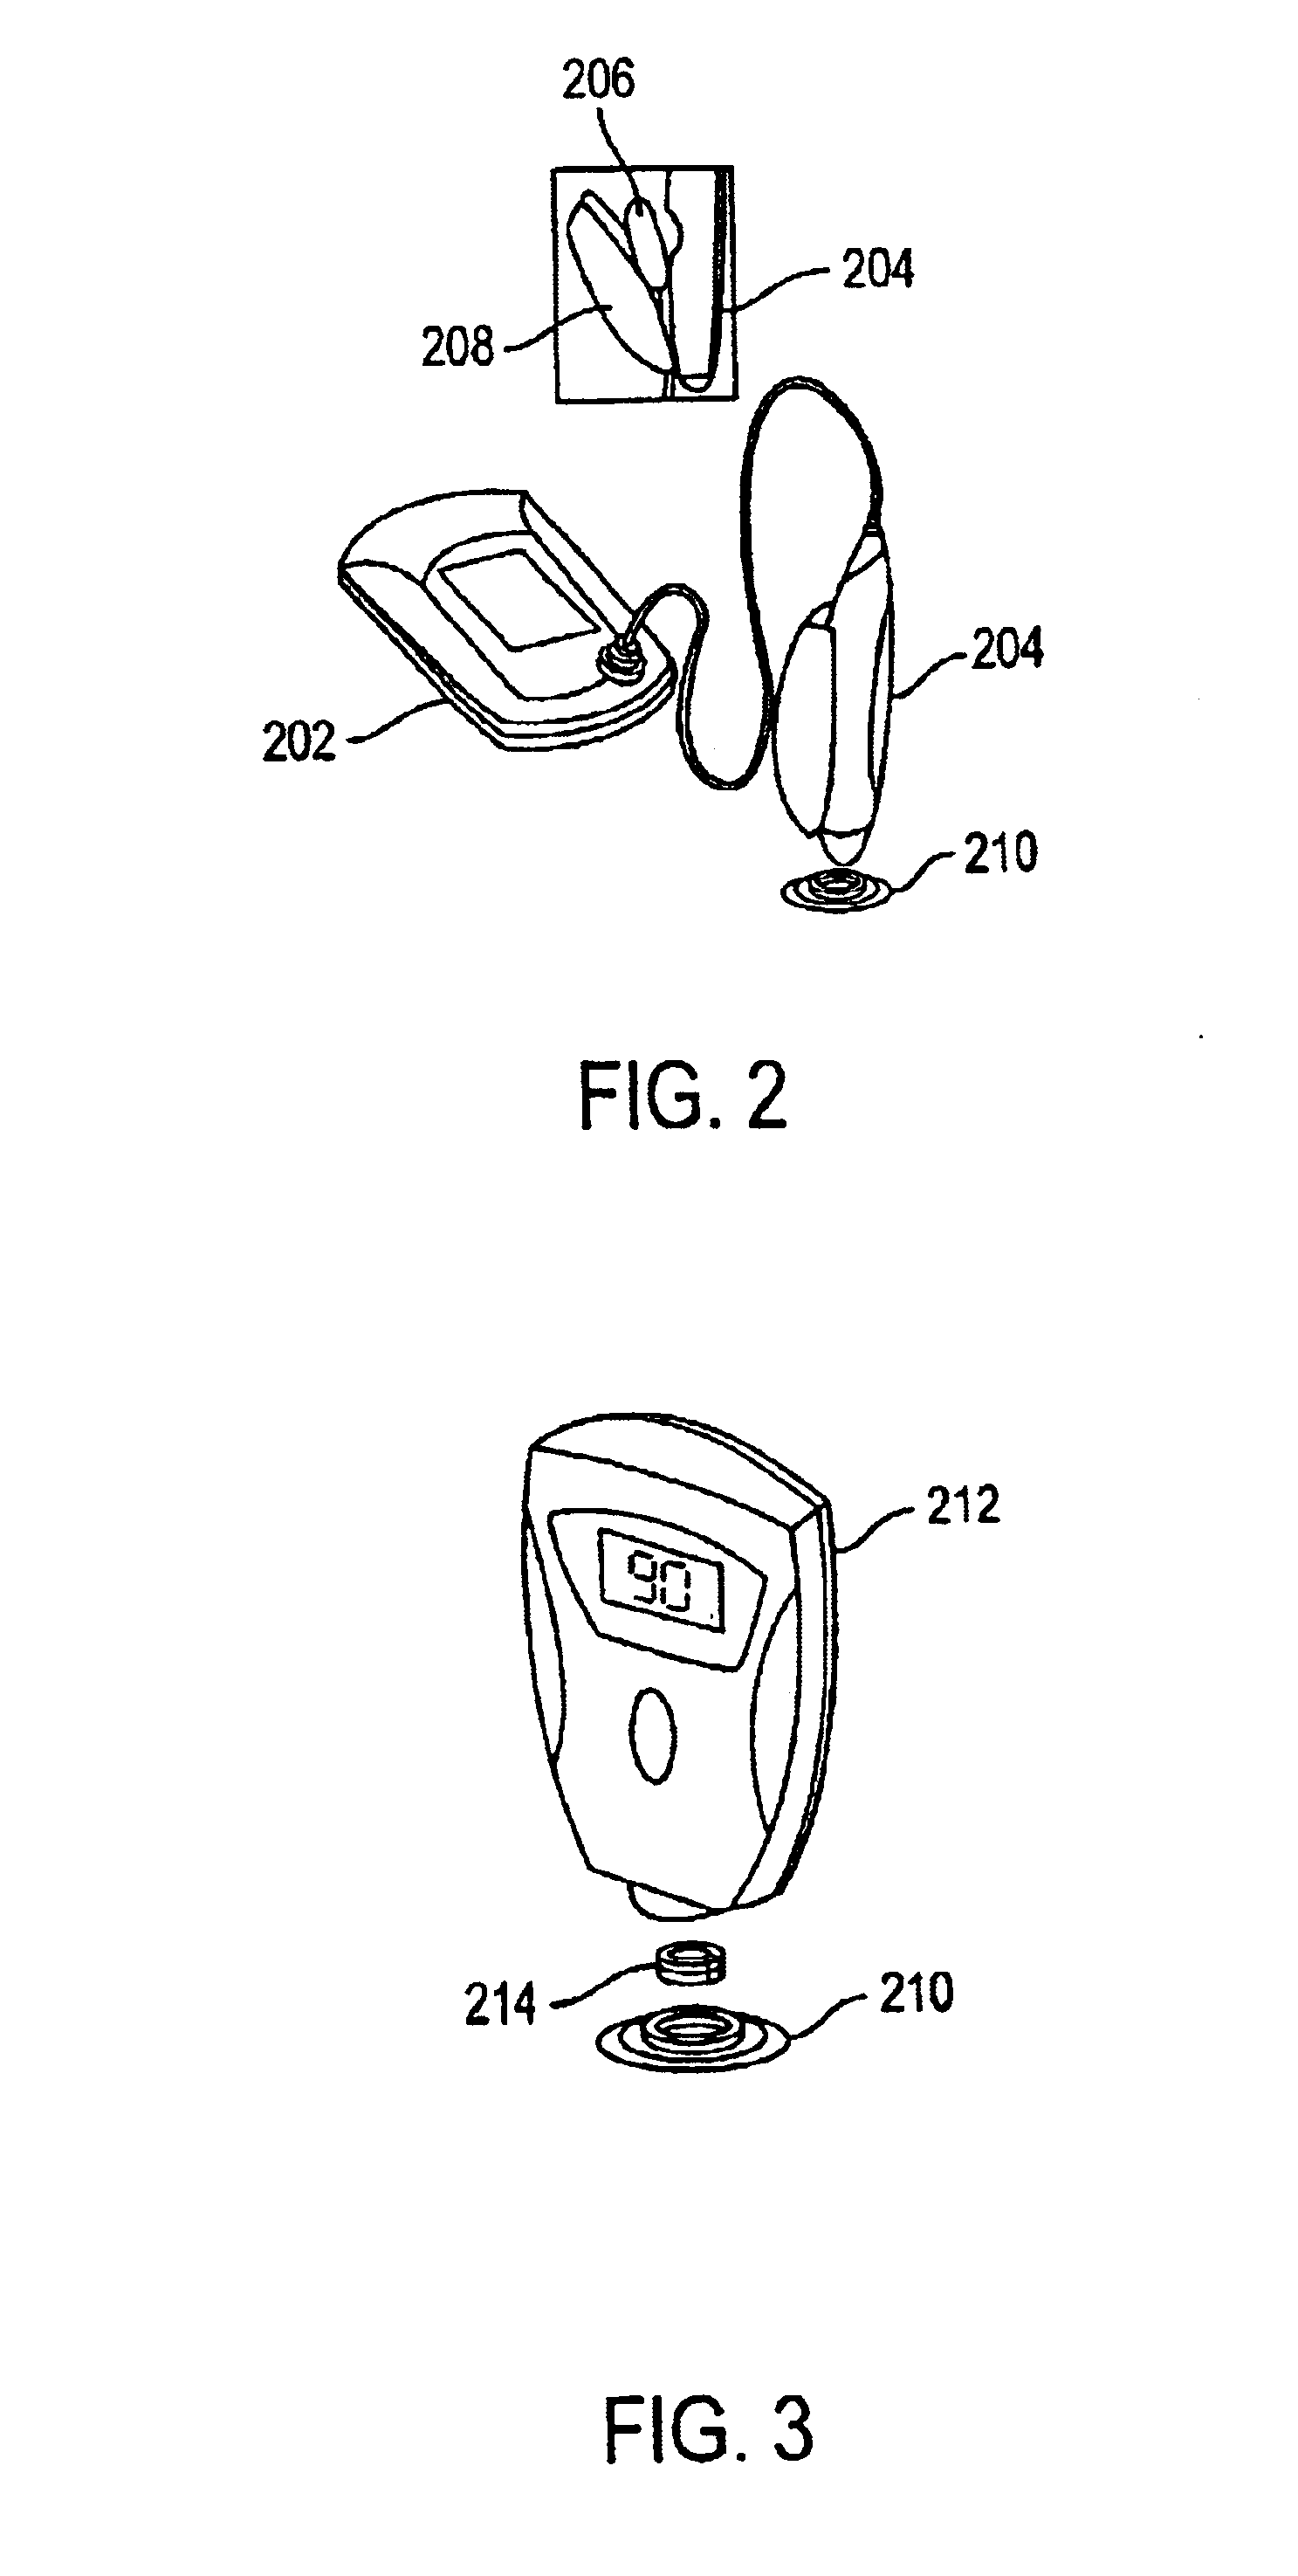 System, method, and device for non-invasive body fluid sampling and analysis